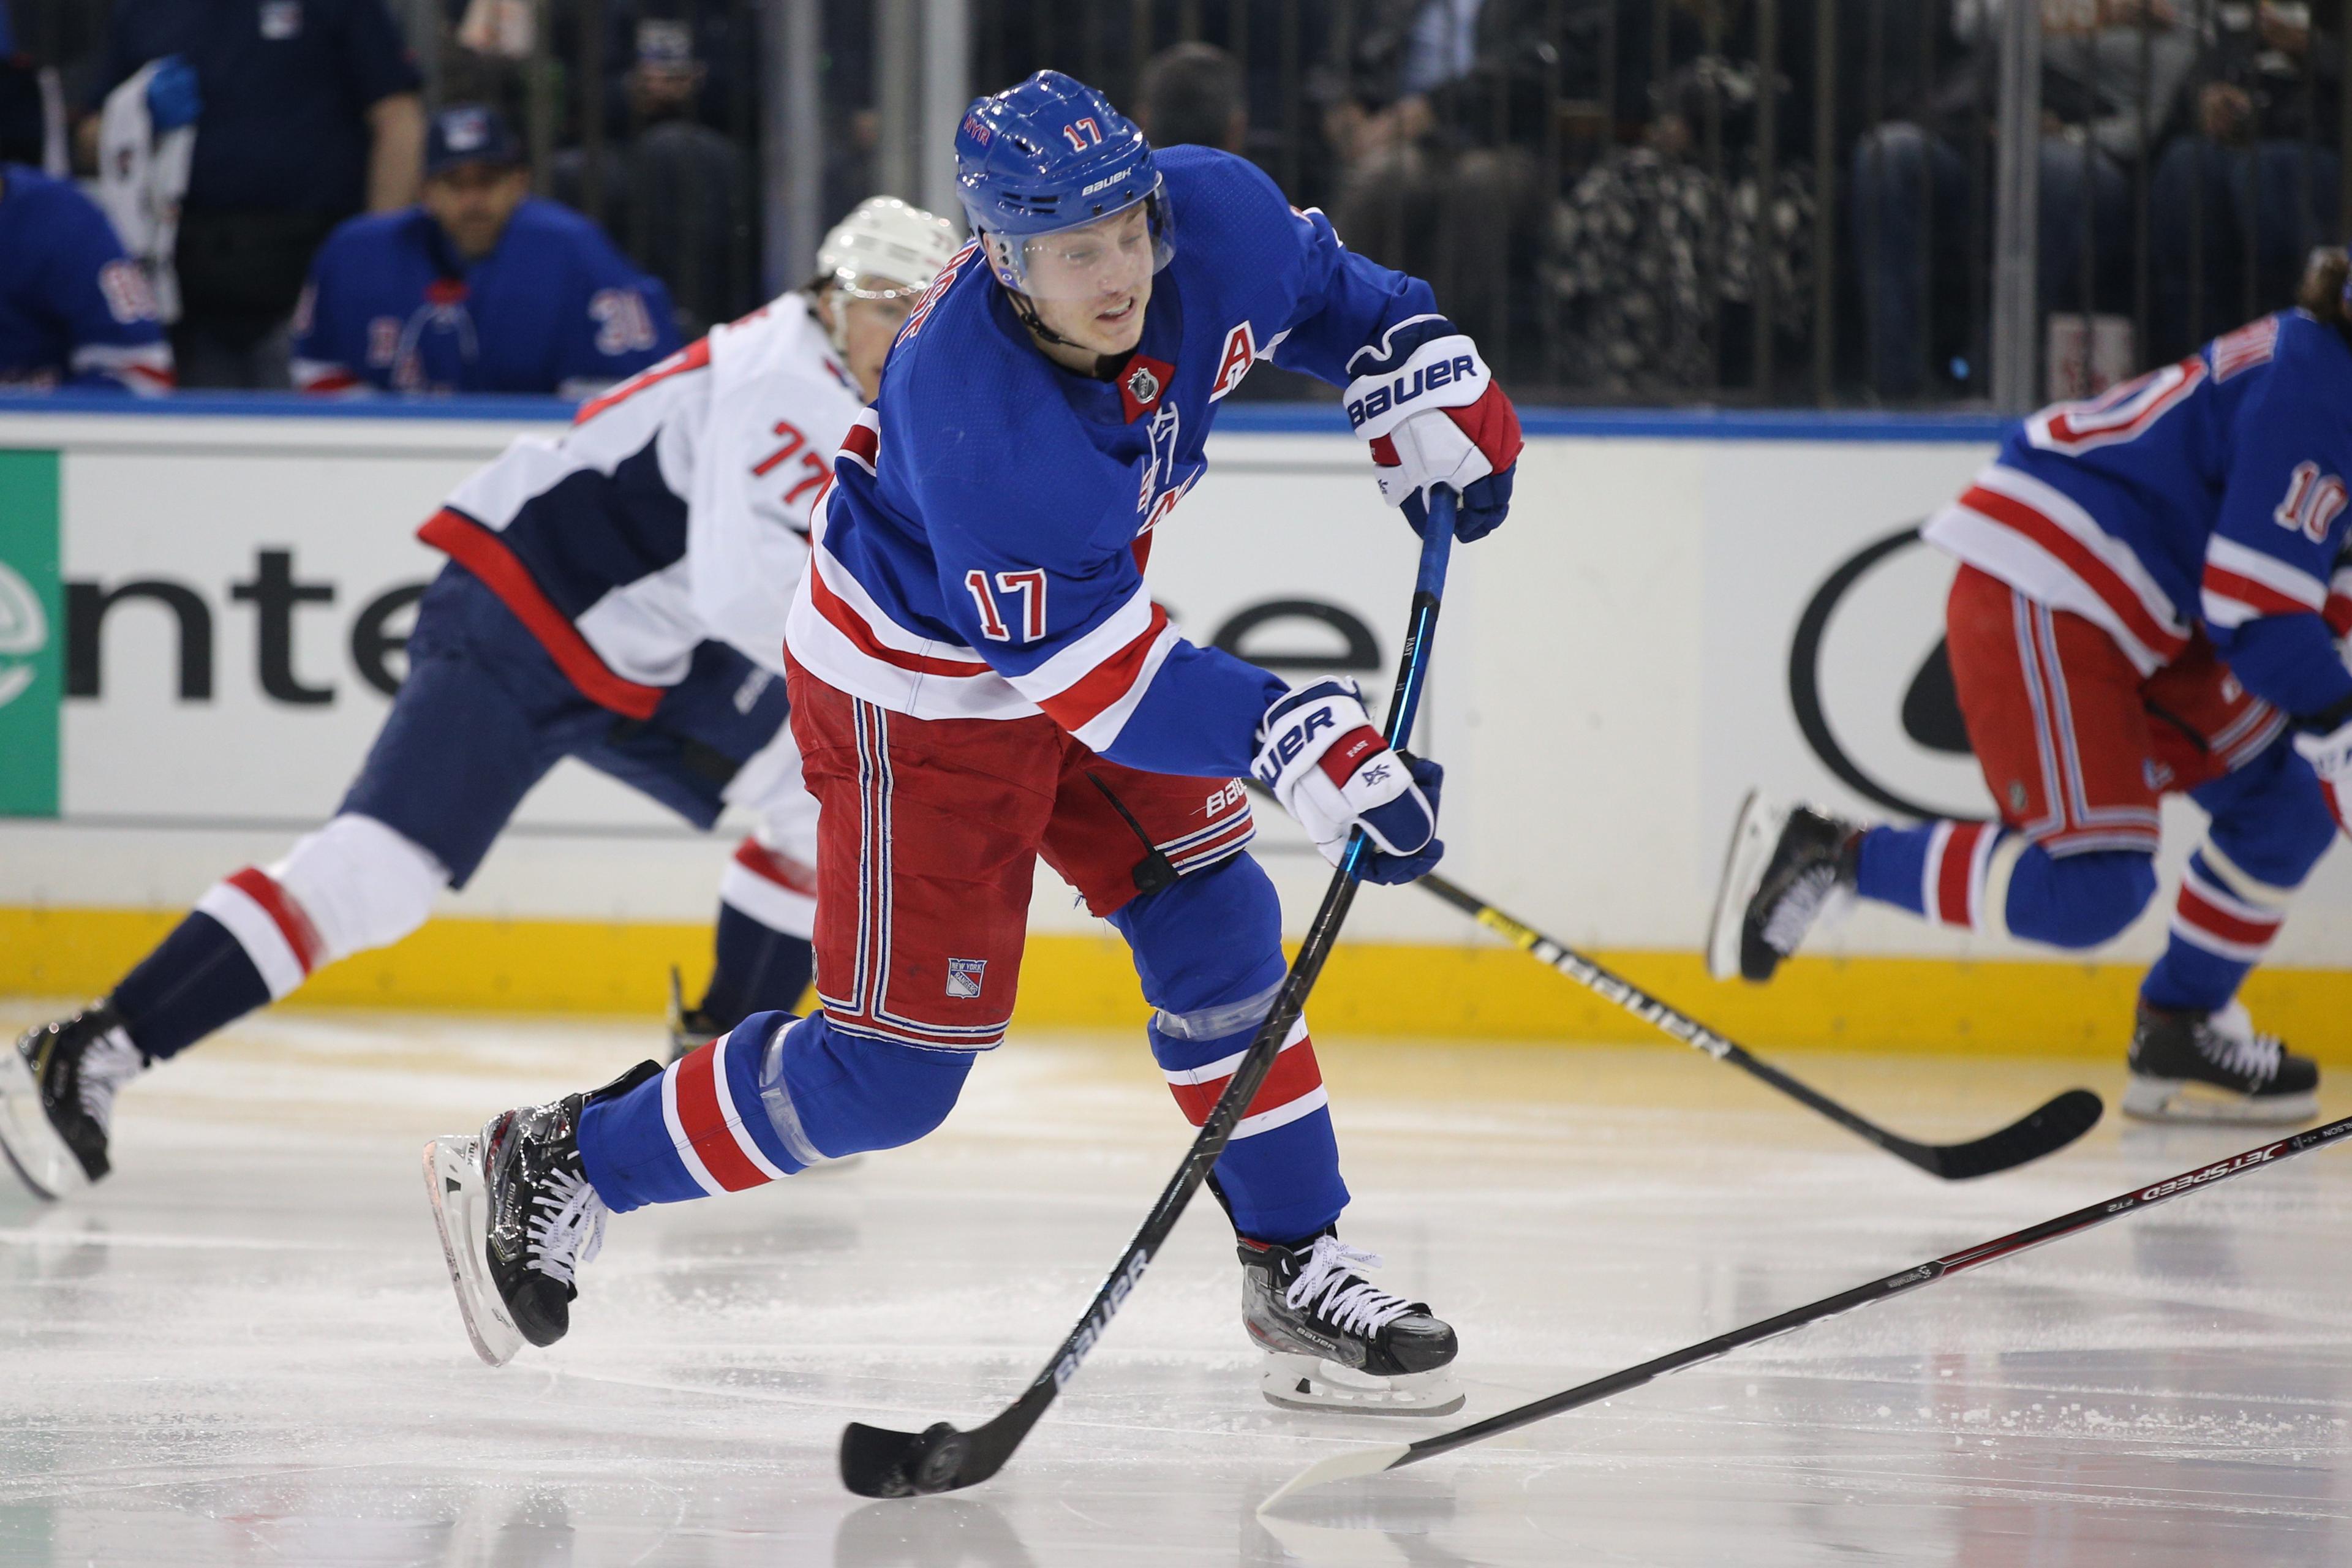 New York Rangers right wing Jesper Fast (17) shoots against the Washington Capitals during the second period at Madison Square Garden. / Brad Penner - USA Today Sports